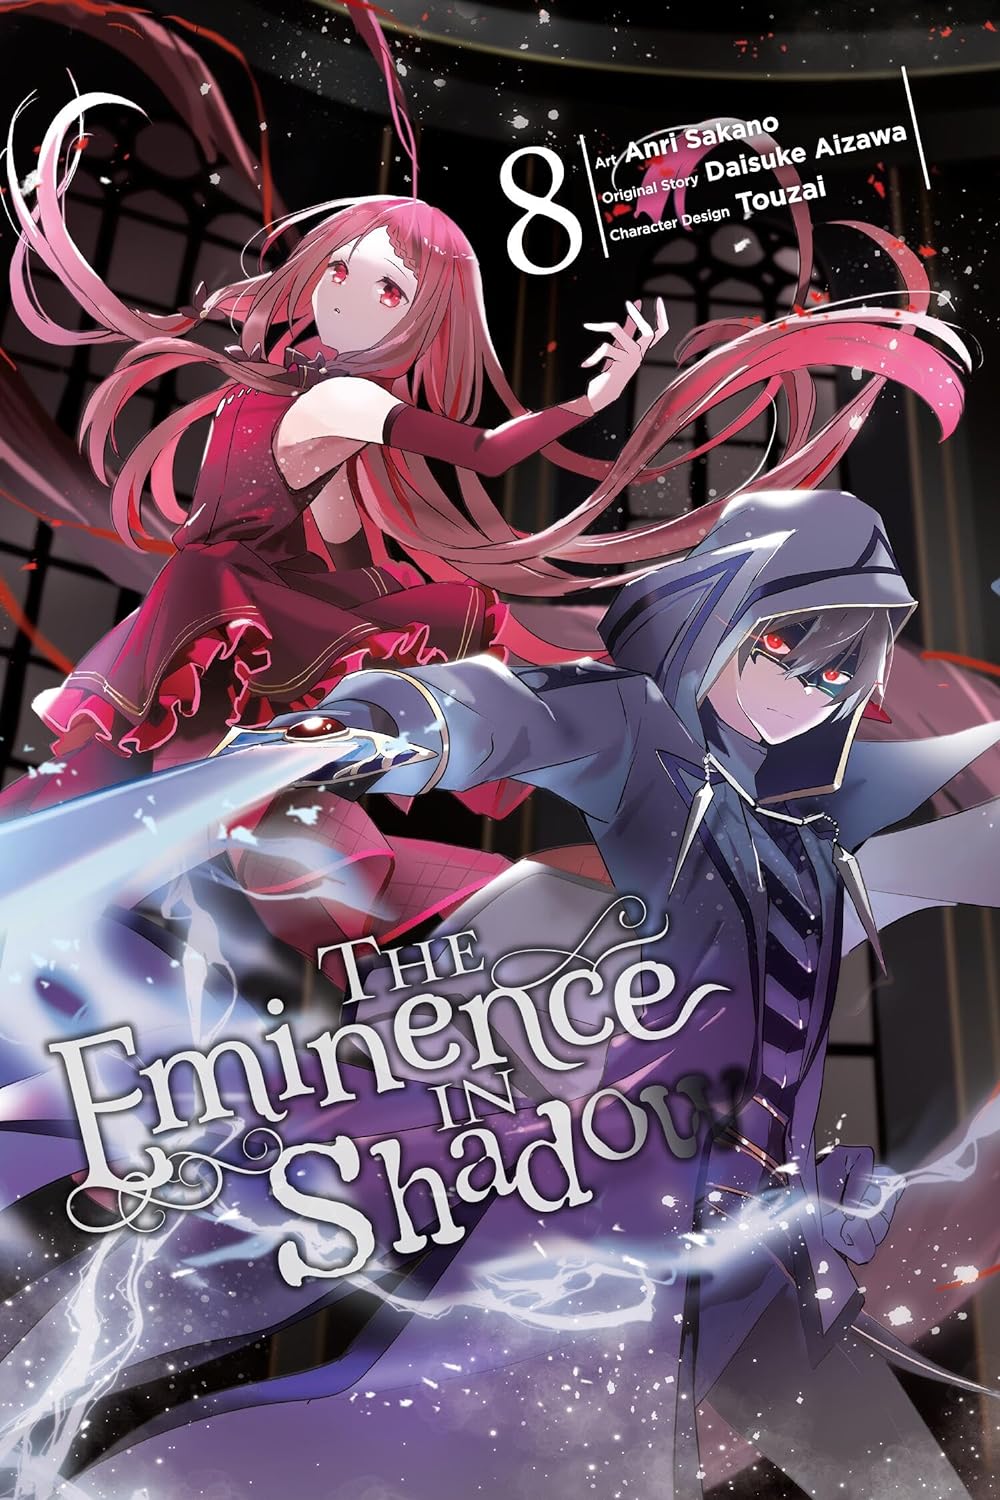 The Eminence in Shadow (Manga) Vol. 08